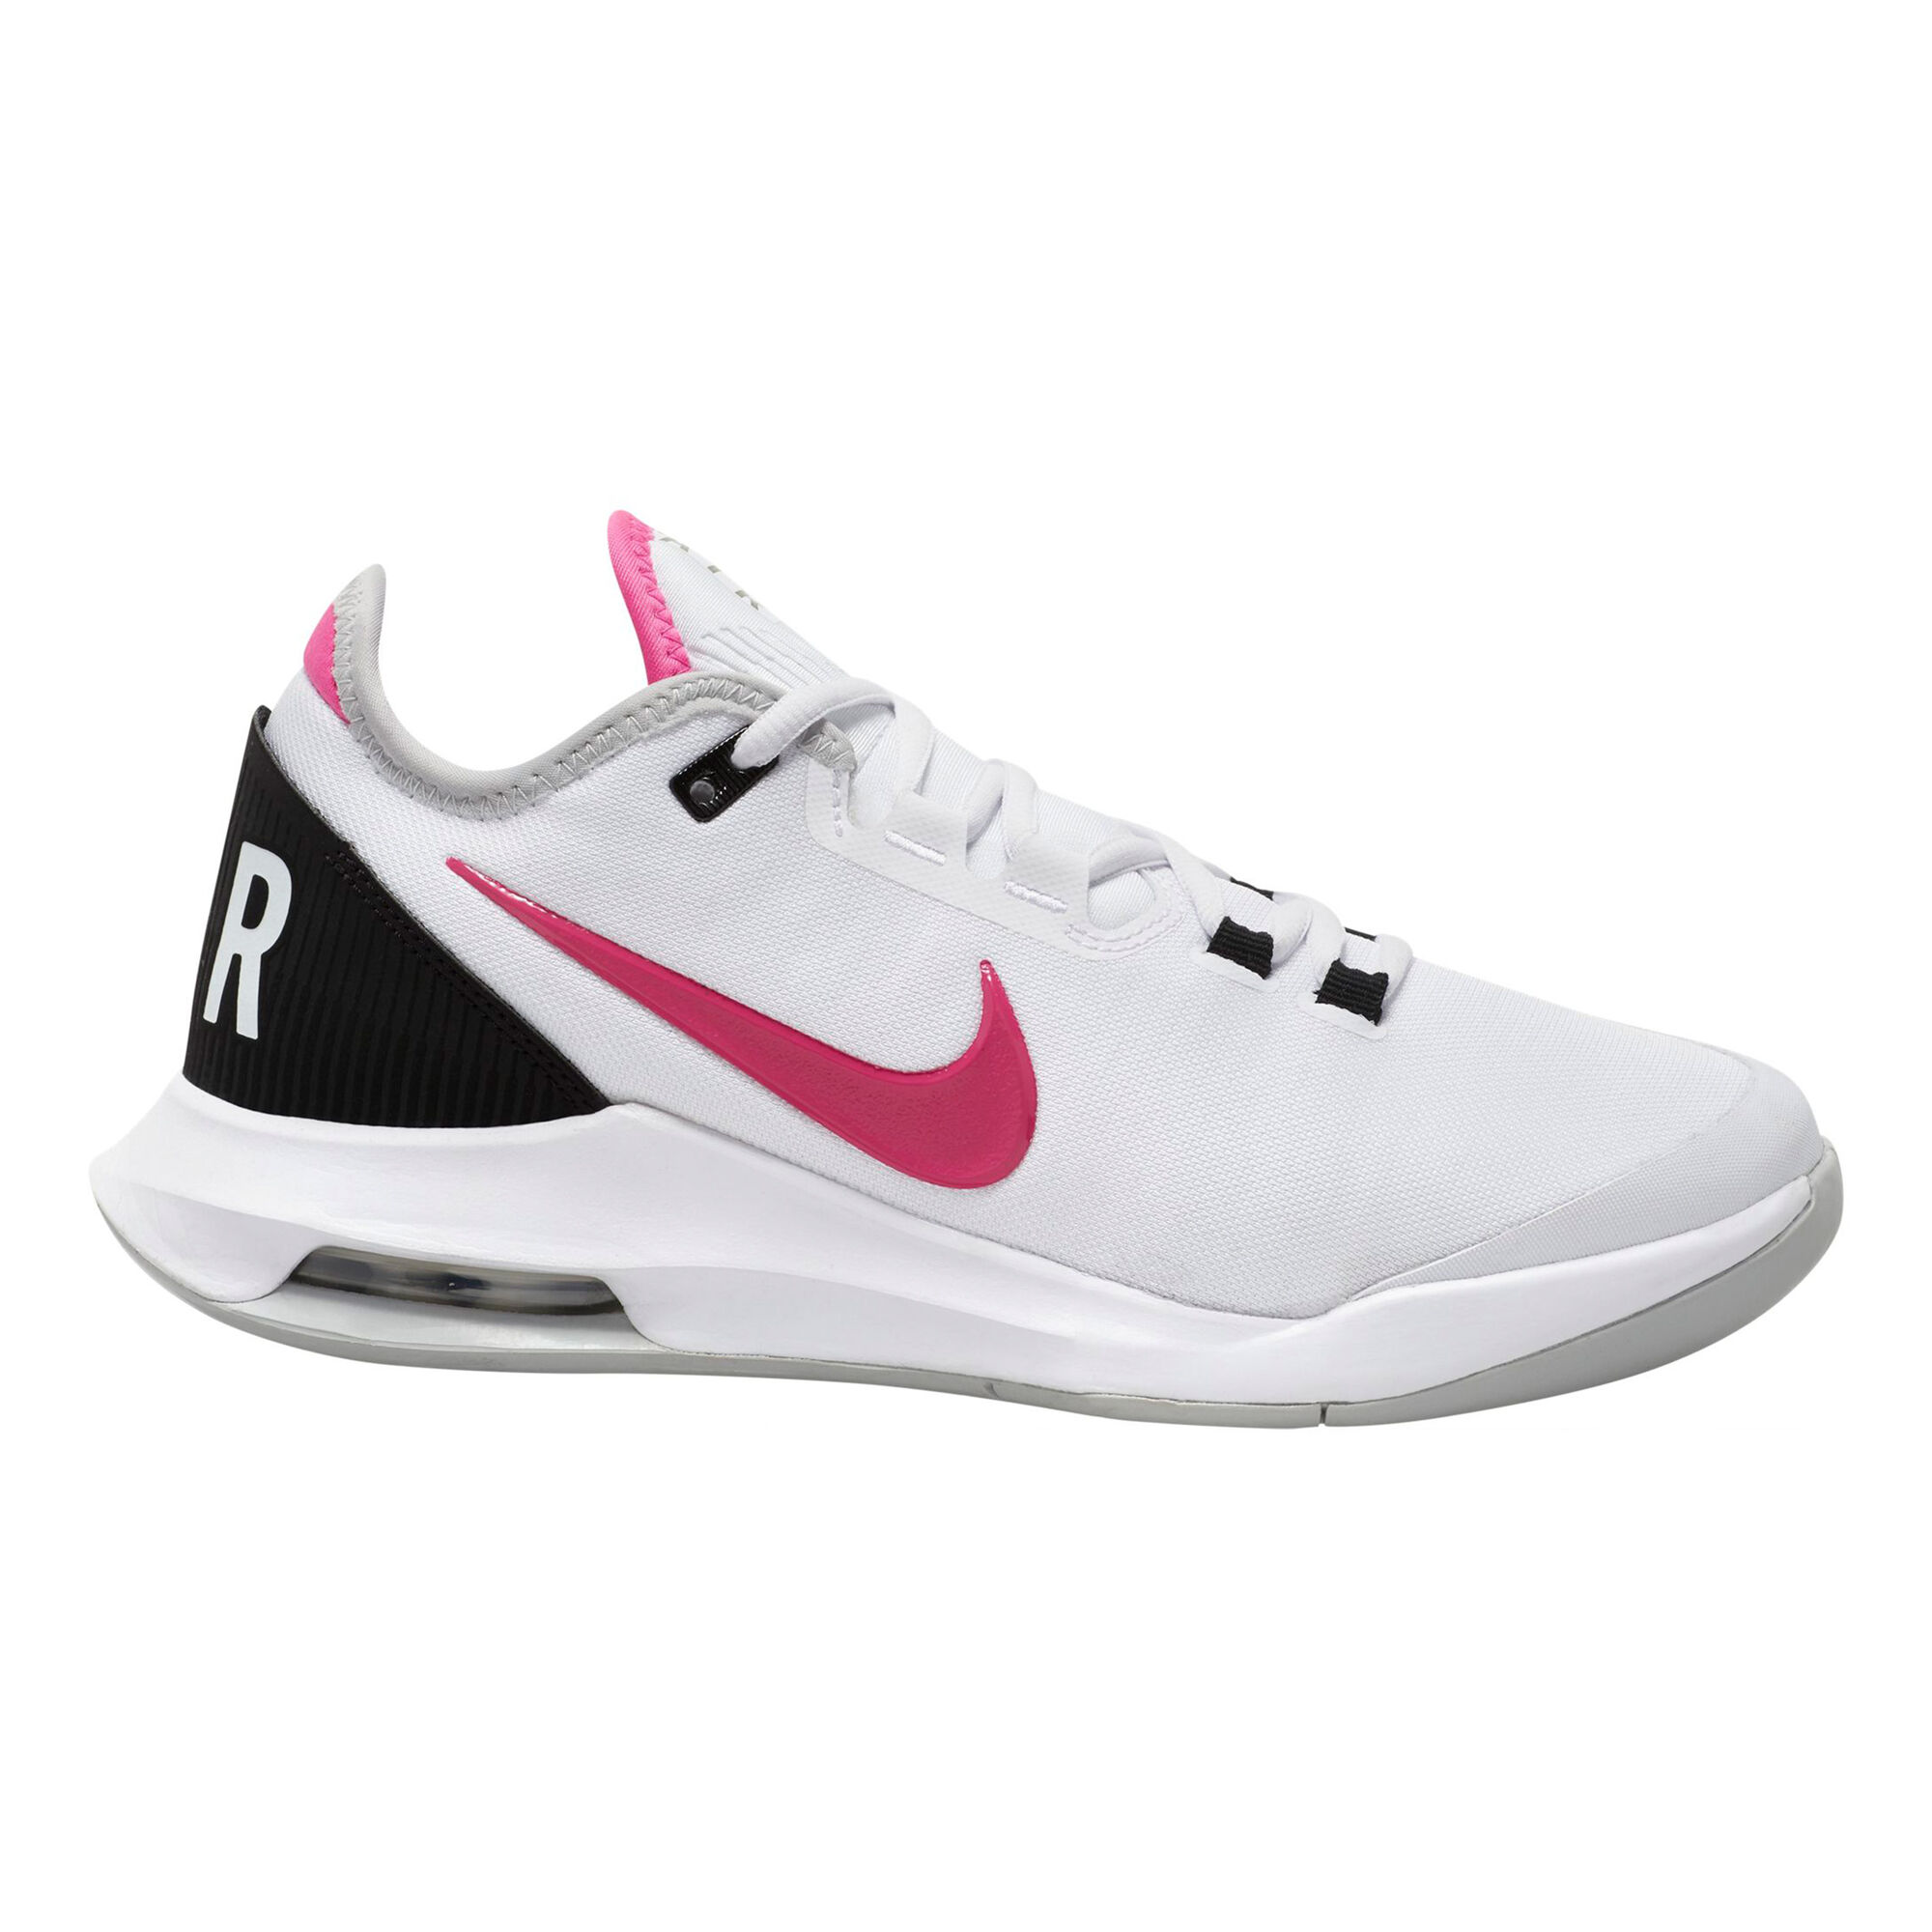 buy Nike Air Max Wildcard All Court Shoe Women - White, Pink online ...